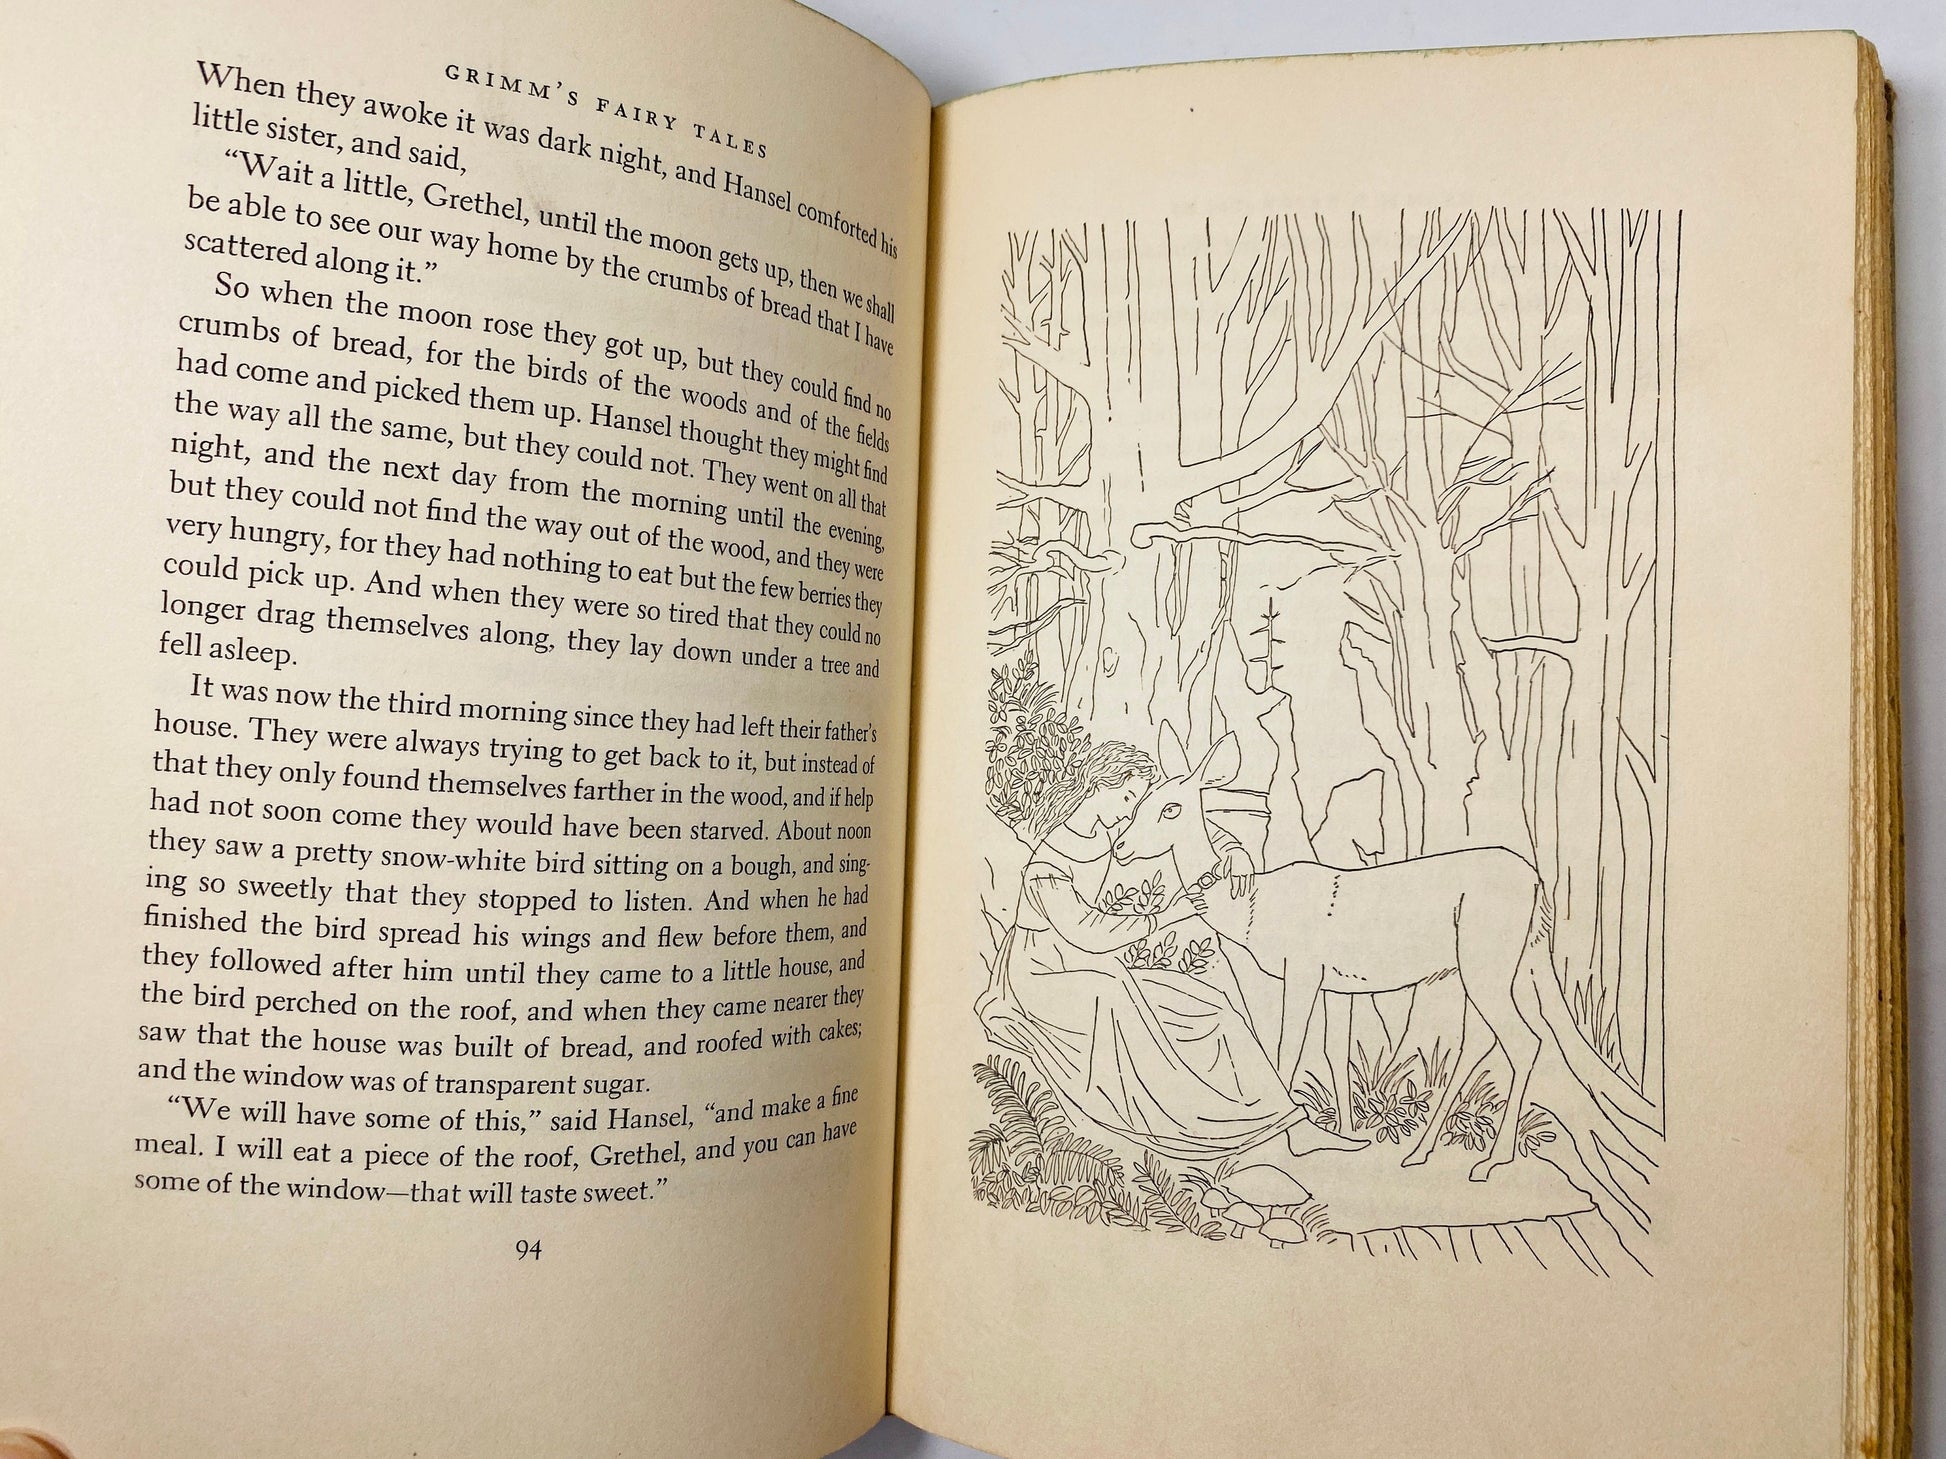 1954 Grimm's Fairy Tales book by the Grimm Brothers vintage Children's stories Junior Deluxe Editions